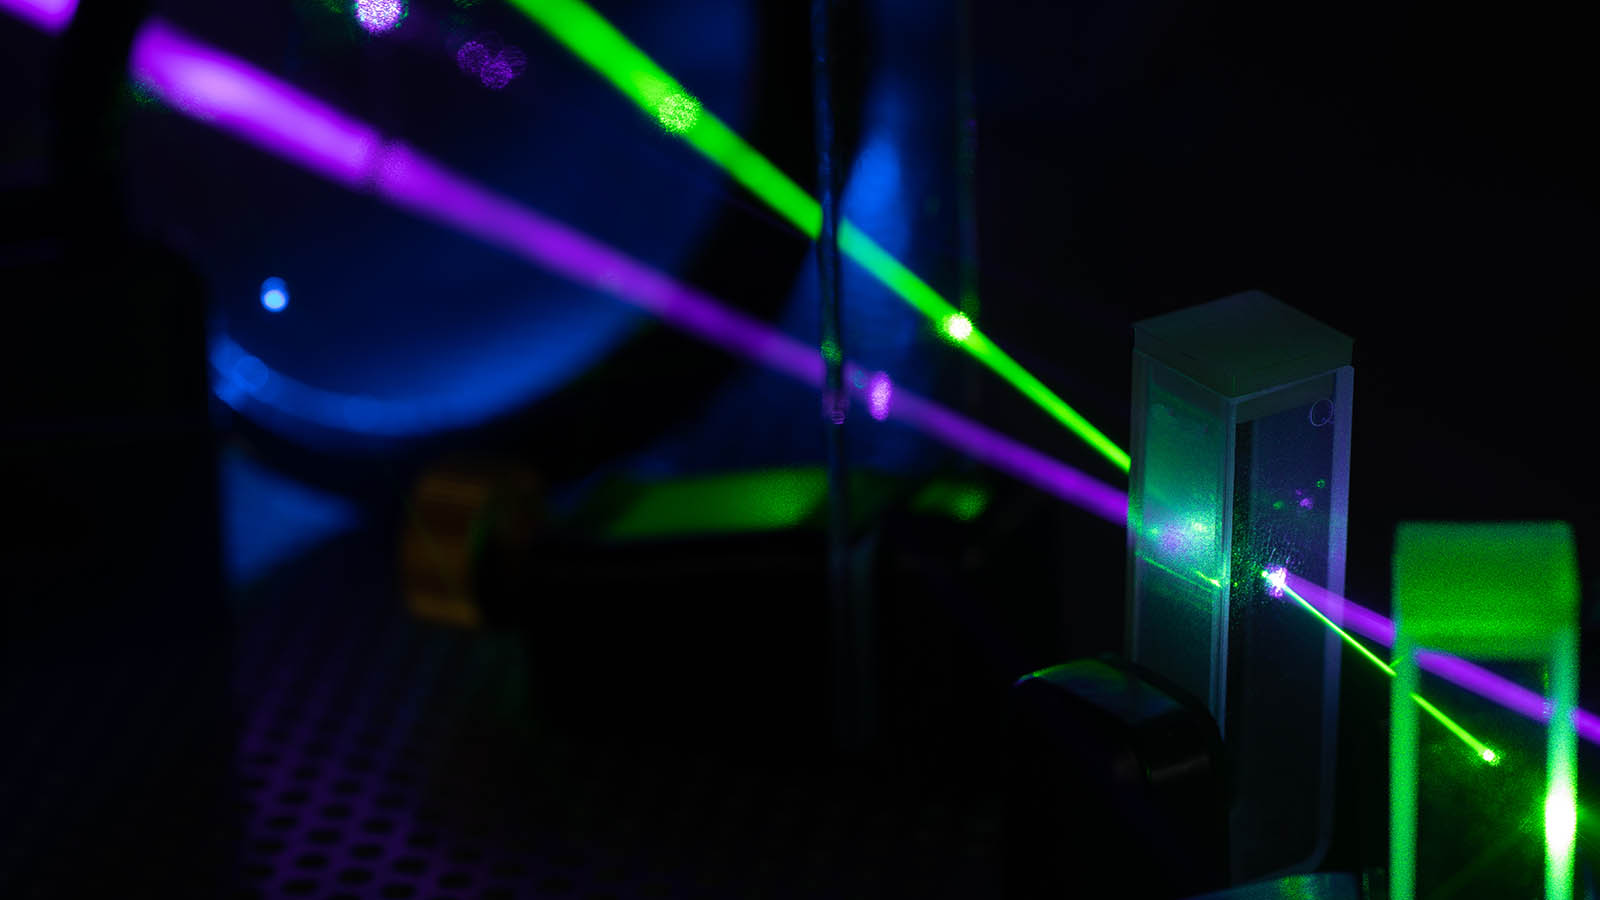 LASE Stock. A photo of a purple and green laser going through an object